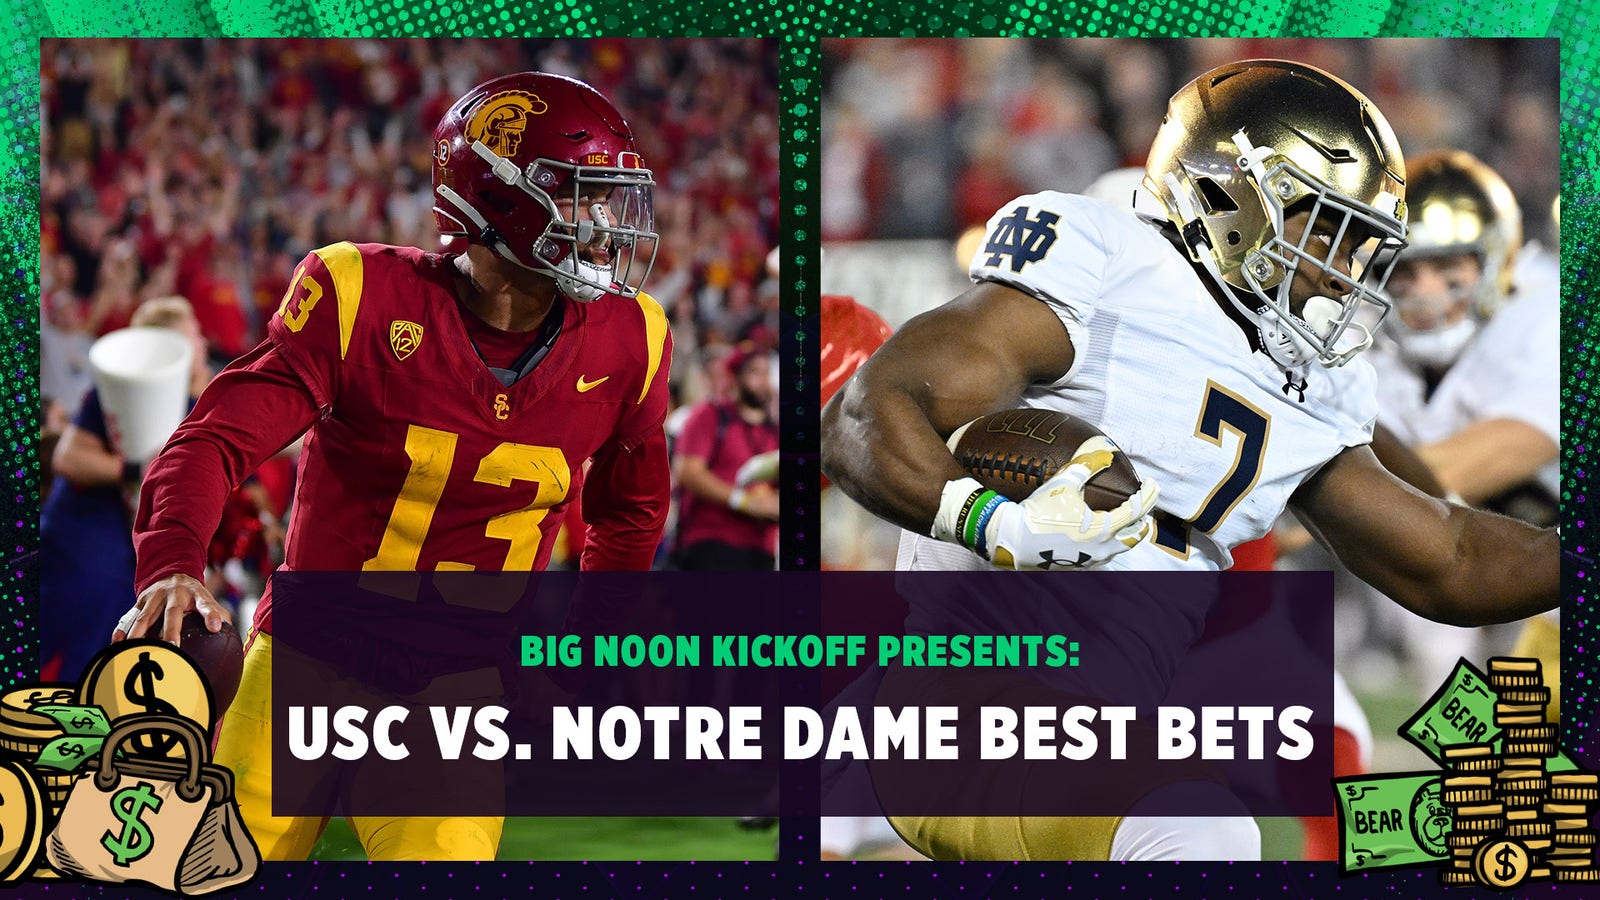 USC vs. Notre Dame best bets, odds and predictions in CFB Week 7